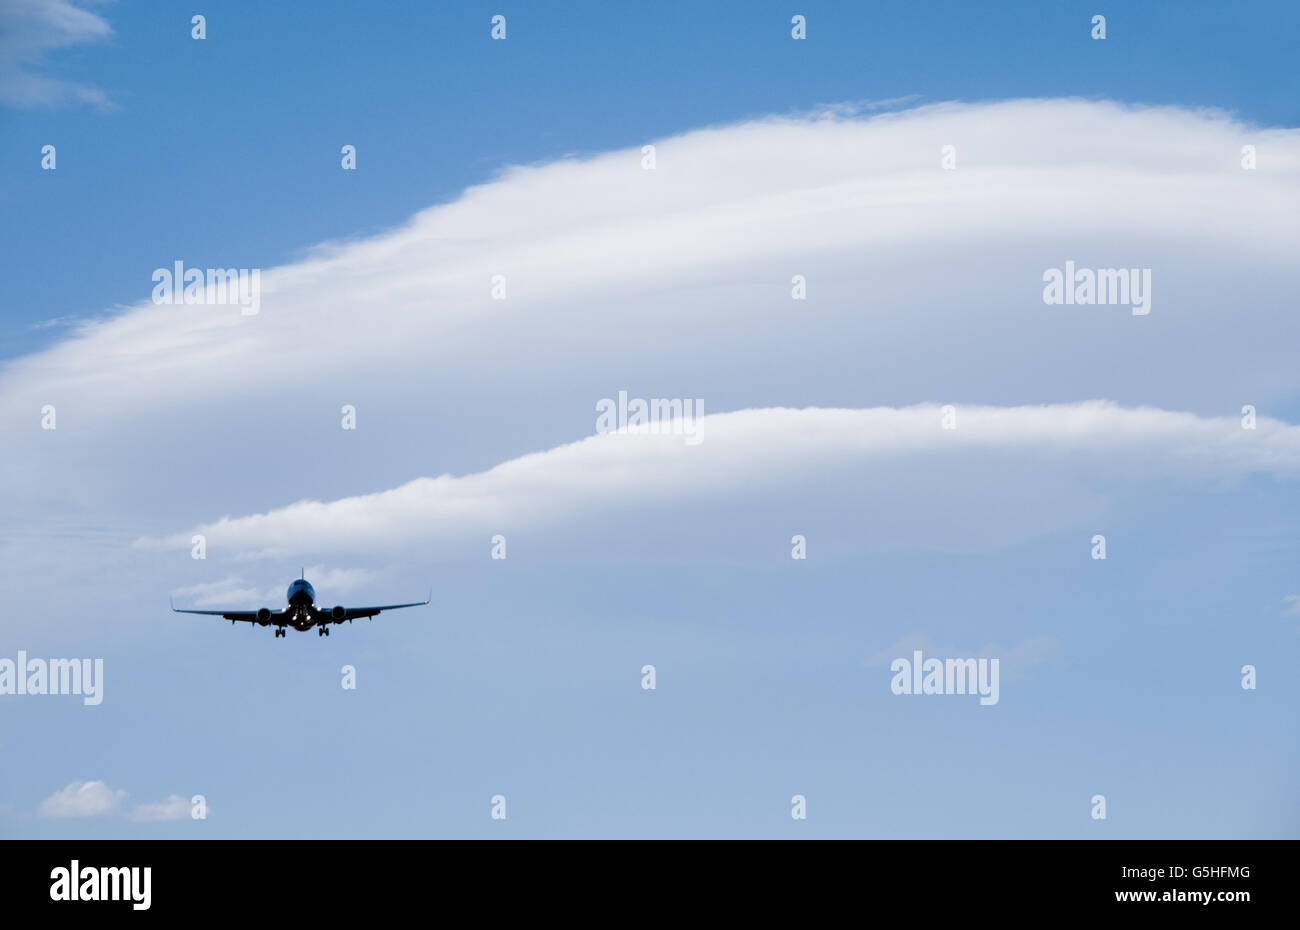 Boeing 737 jet airplane landing with Lenticular Clouds behind Stock Photo